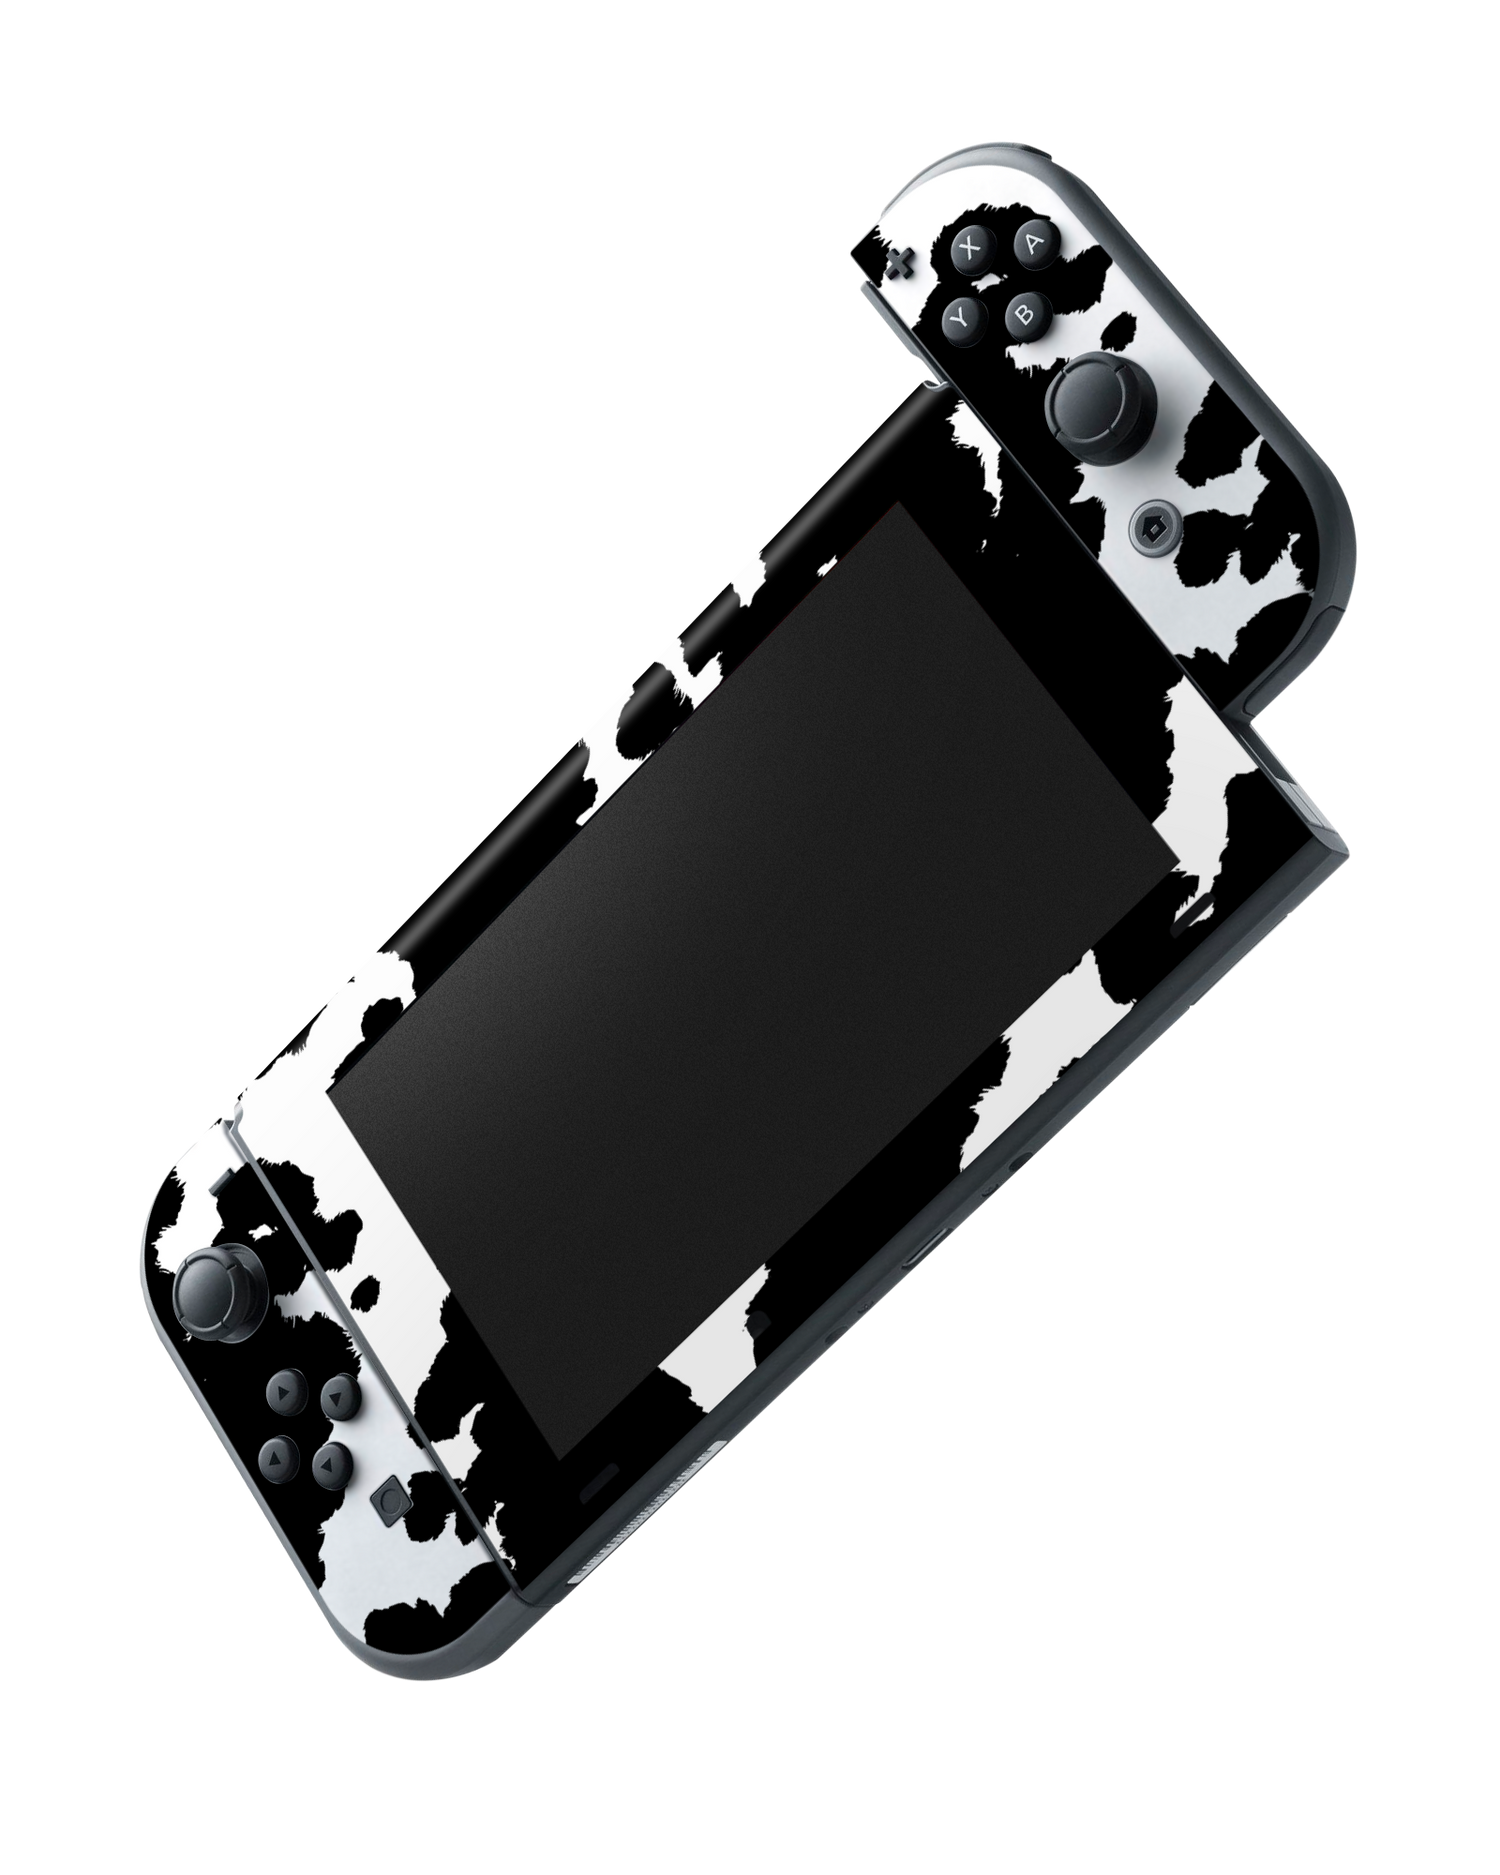 Cow Print Console Skin for Nintendo Switch: Joy-Con removing 